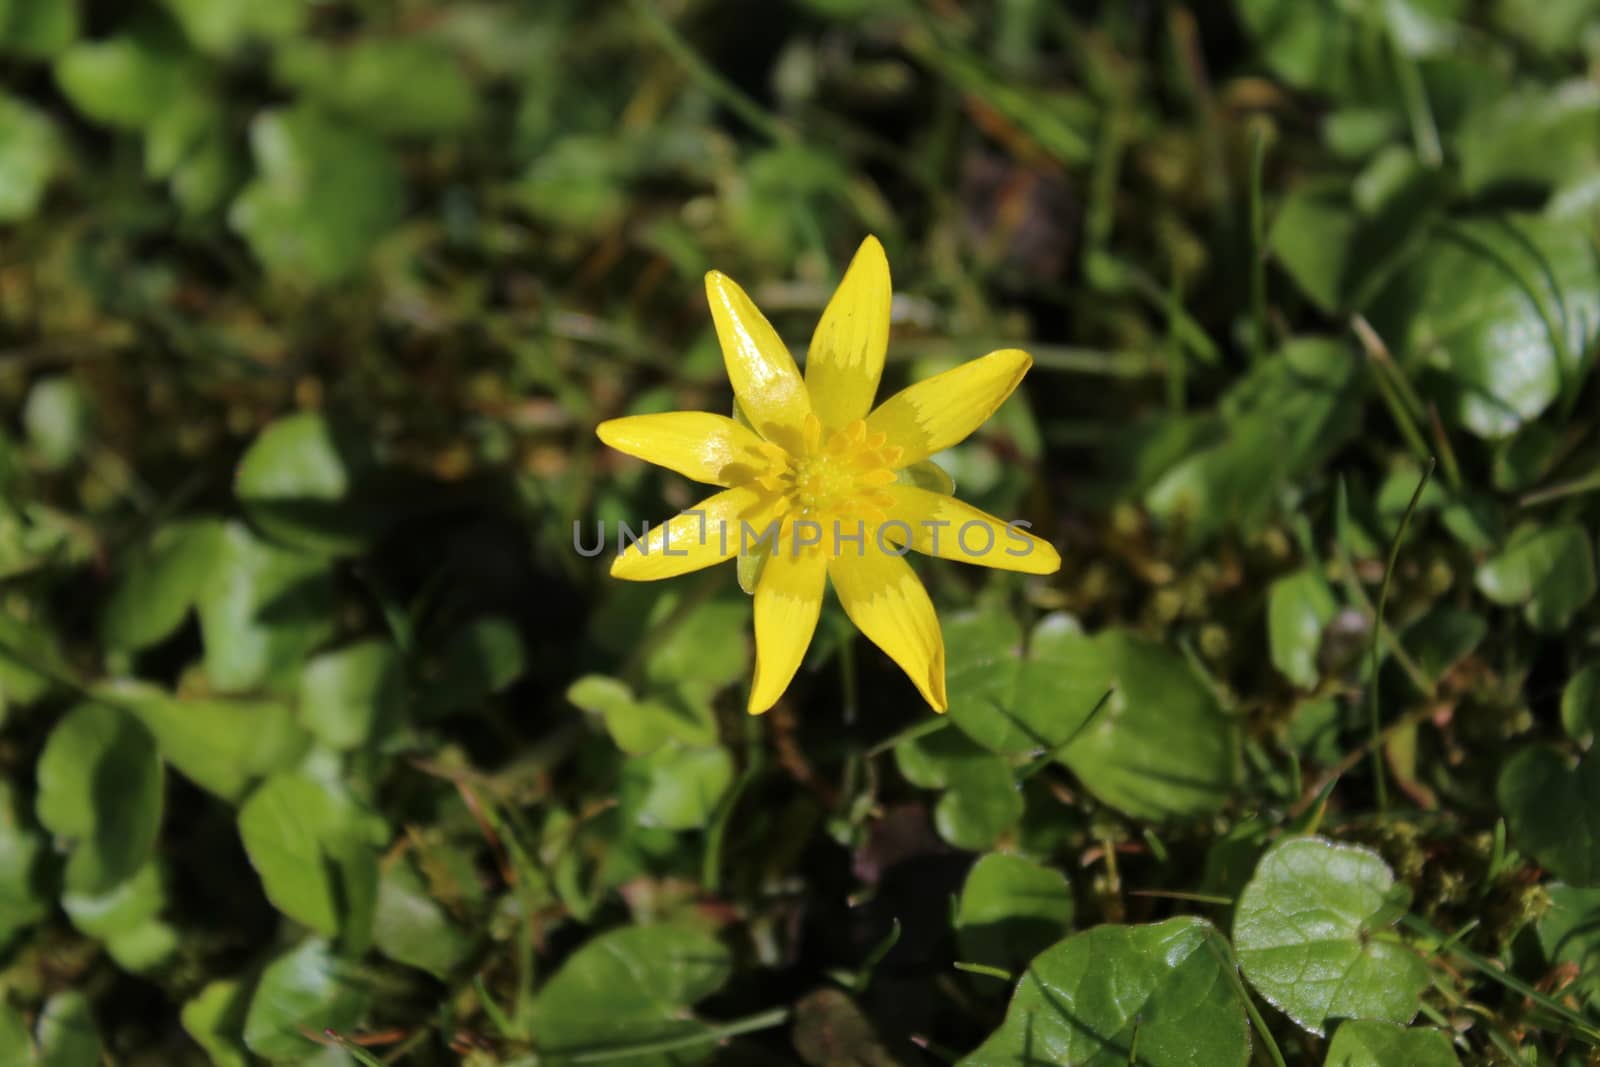 The picture shows a buttercup in the garden.